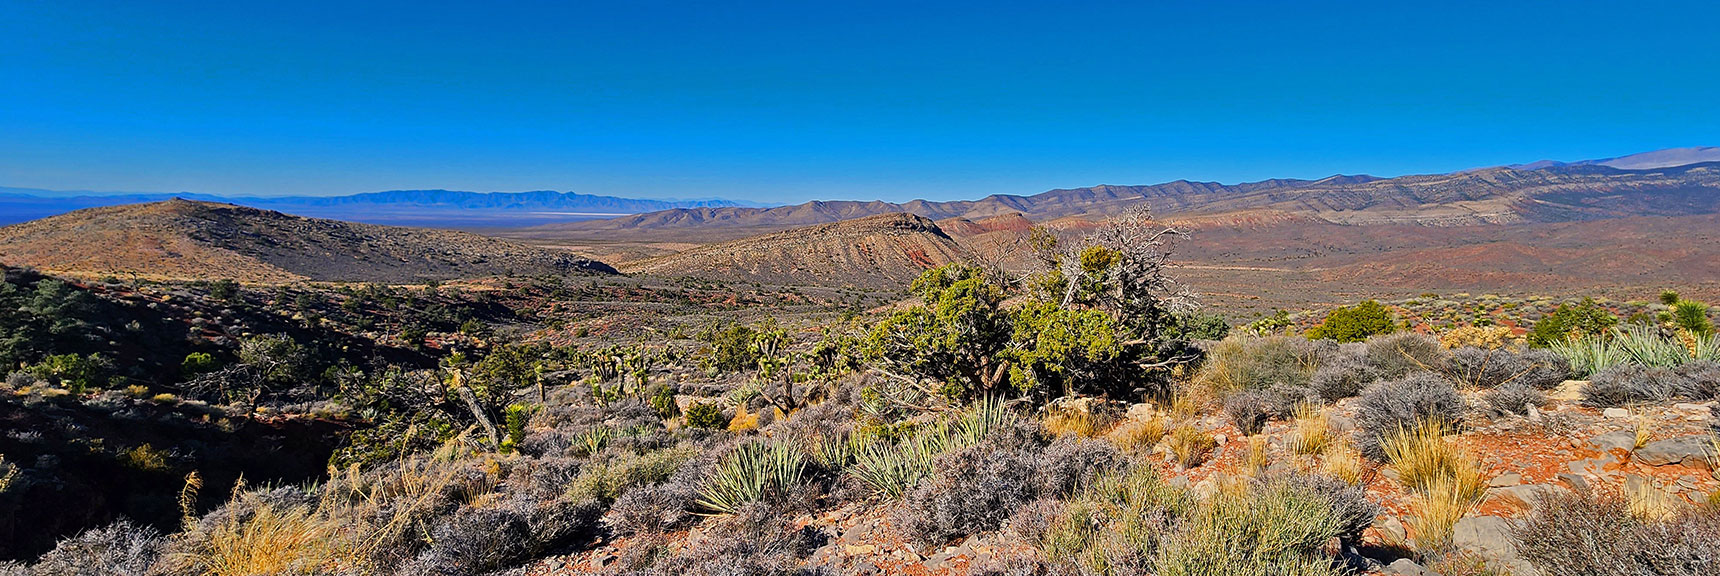 Rounding the North Side, Western Landscape Toward Death Valley Comes into View.| Landmark Bluff Circuit | Lovell Canyon, Nevada